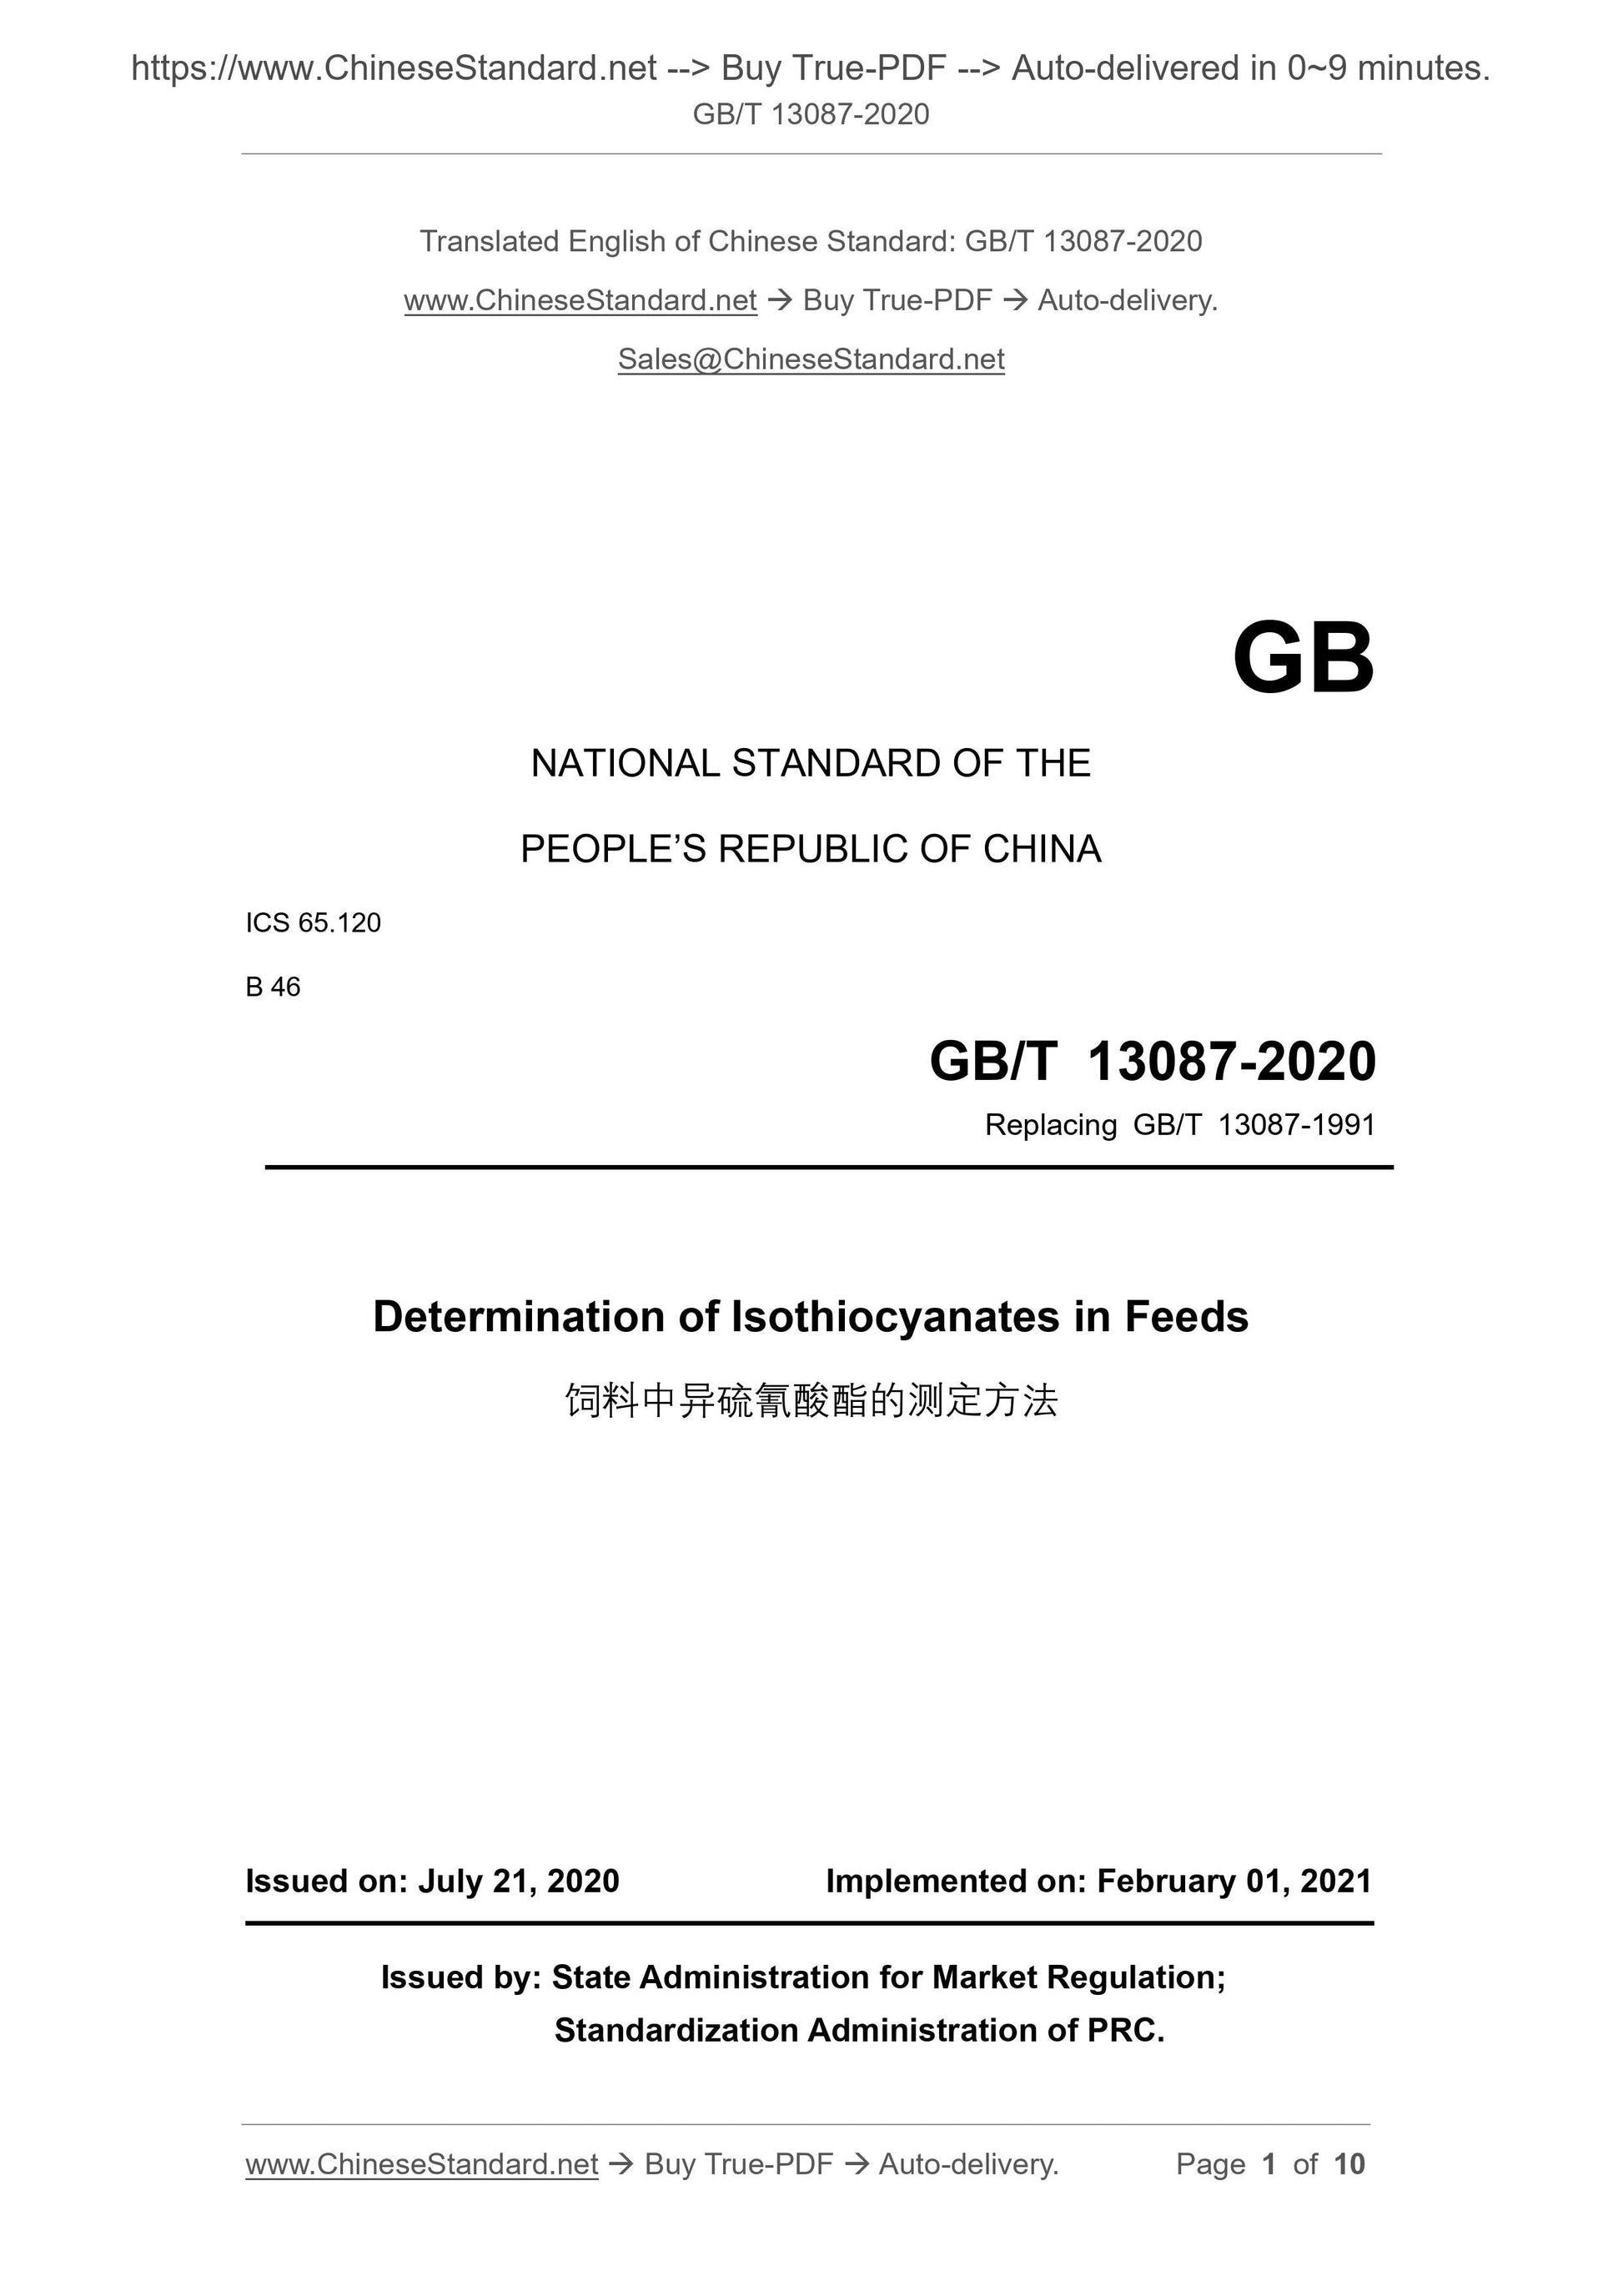 GB/T 13087-2020 Page 1